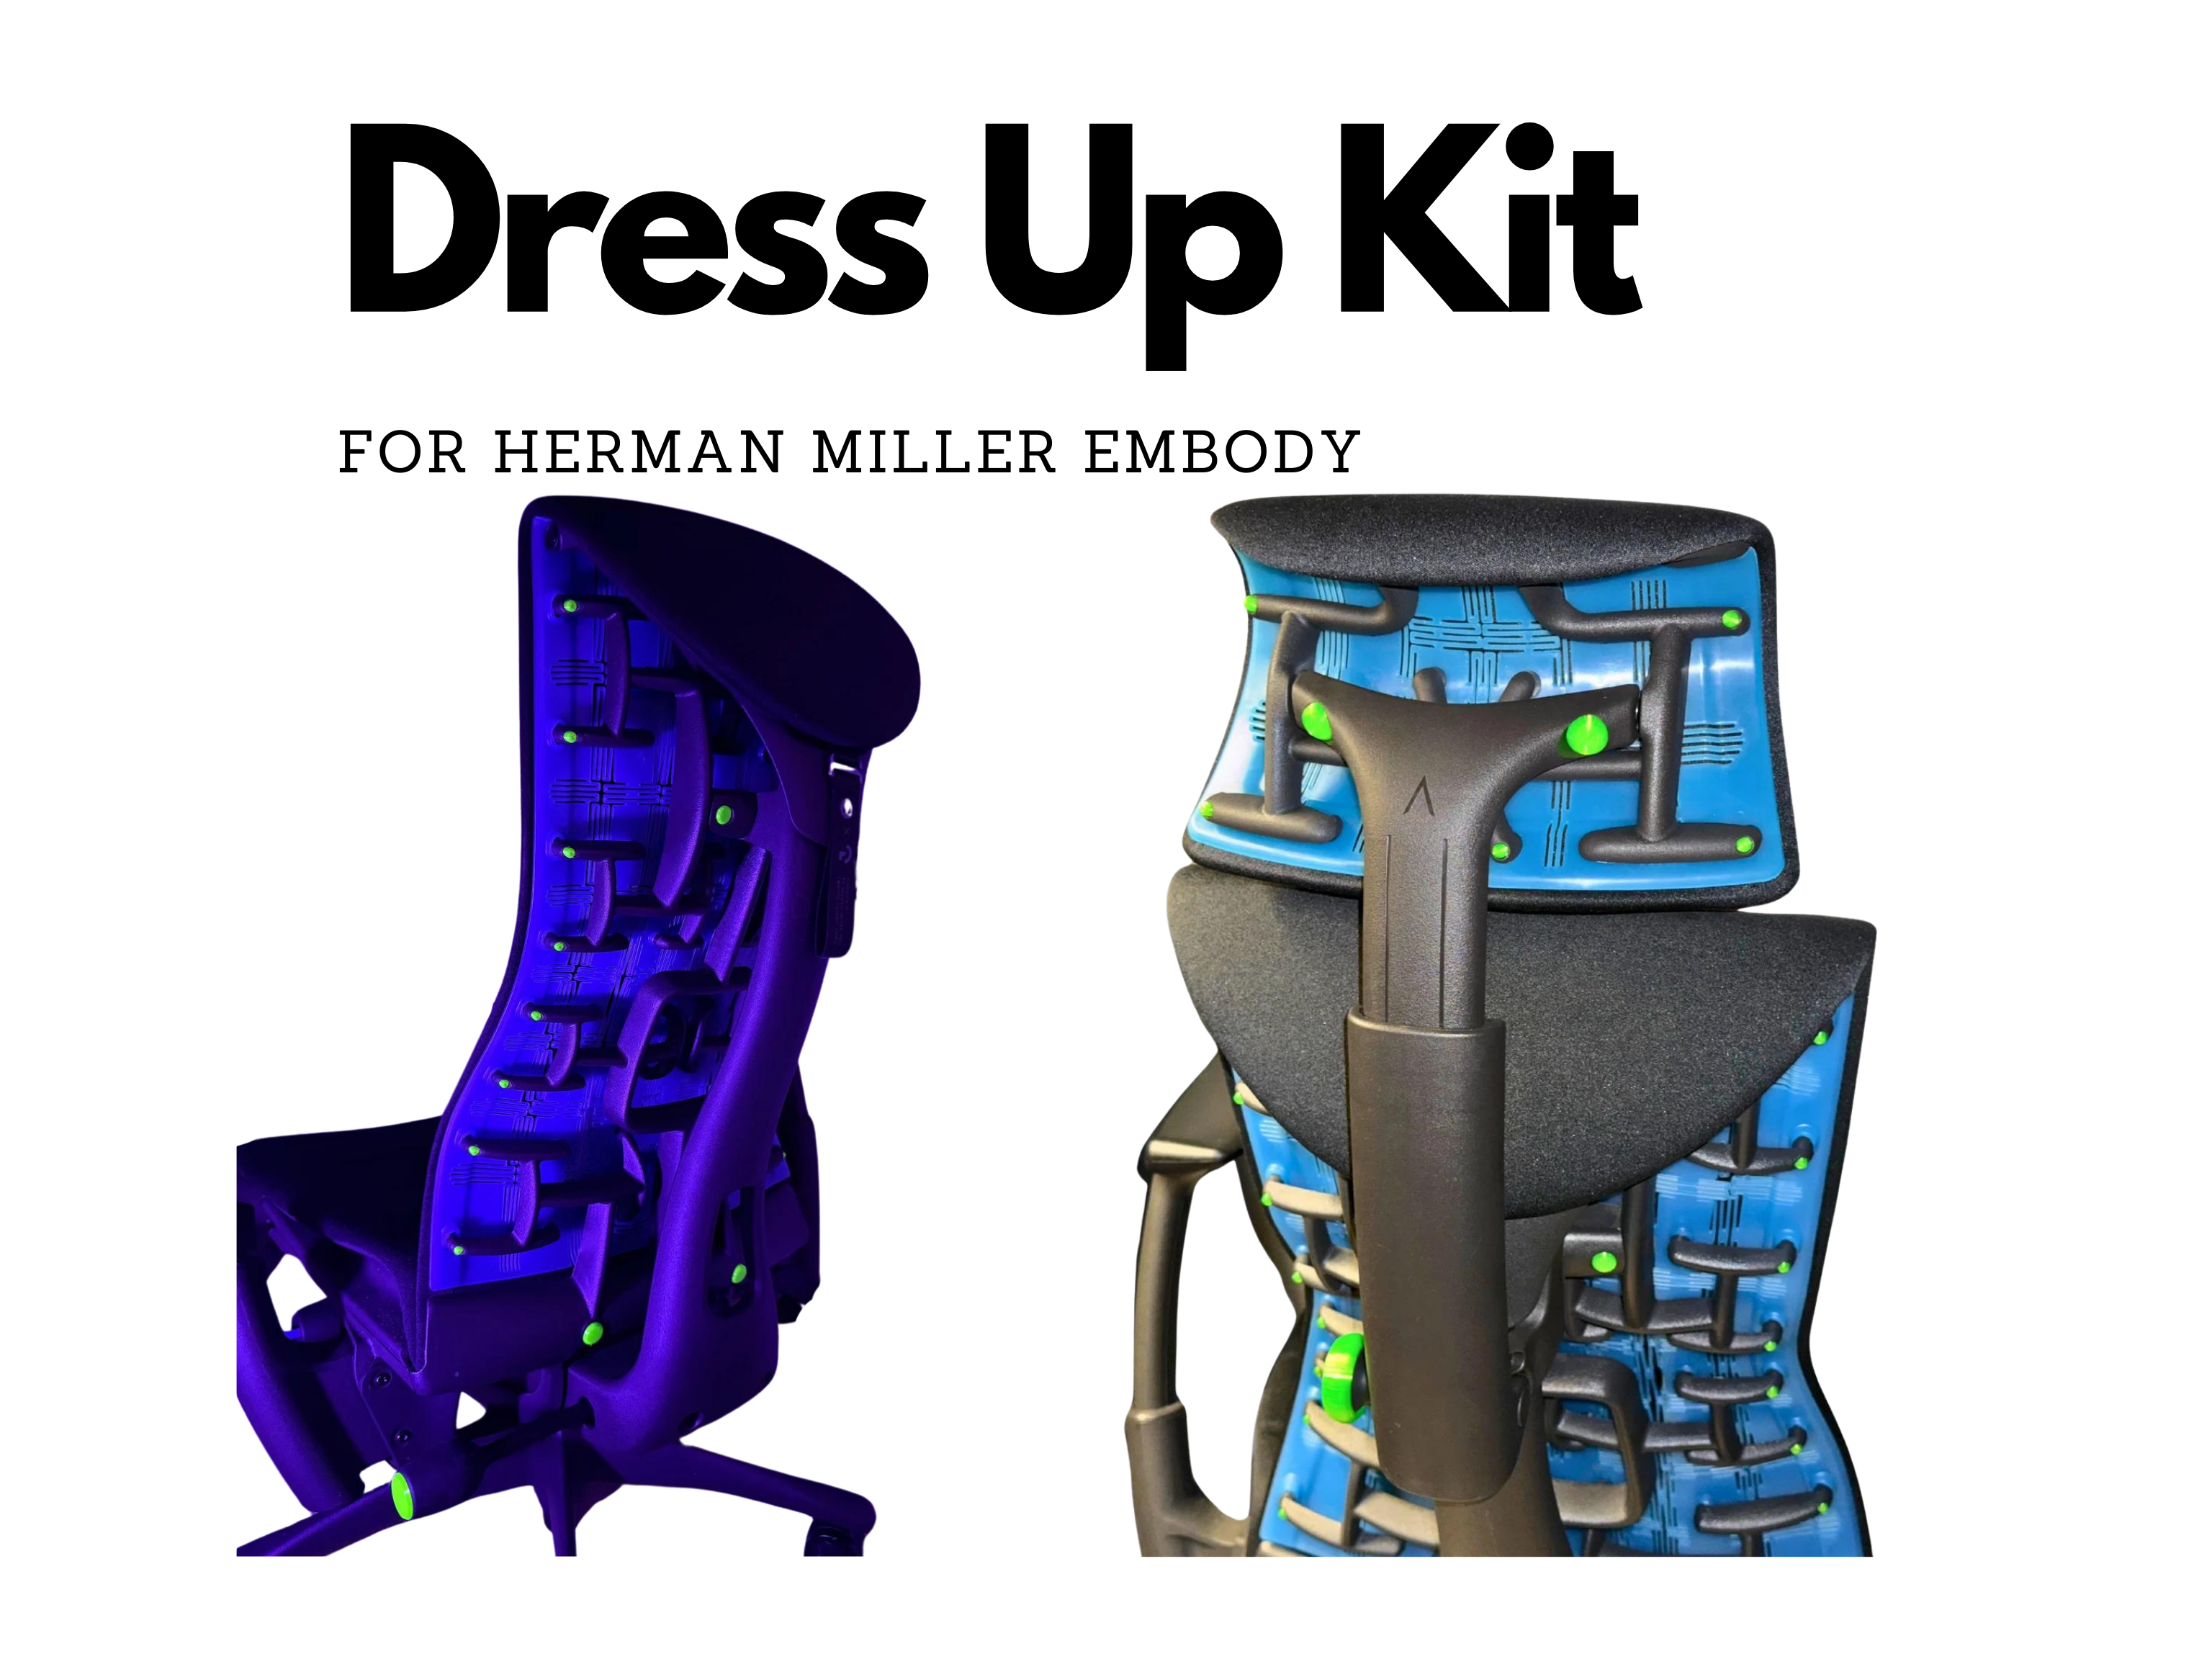 21 Piece Dress-Up Kit for Herman Miller Embody Chair Add Color and Style to Your Gaming Chair